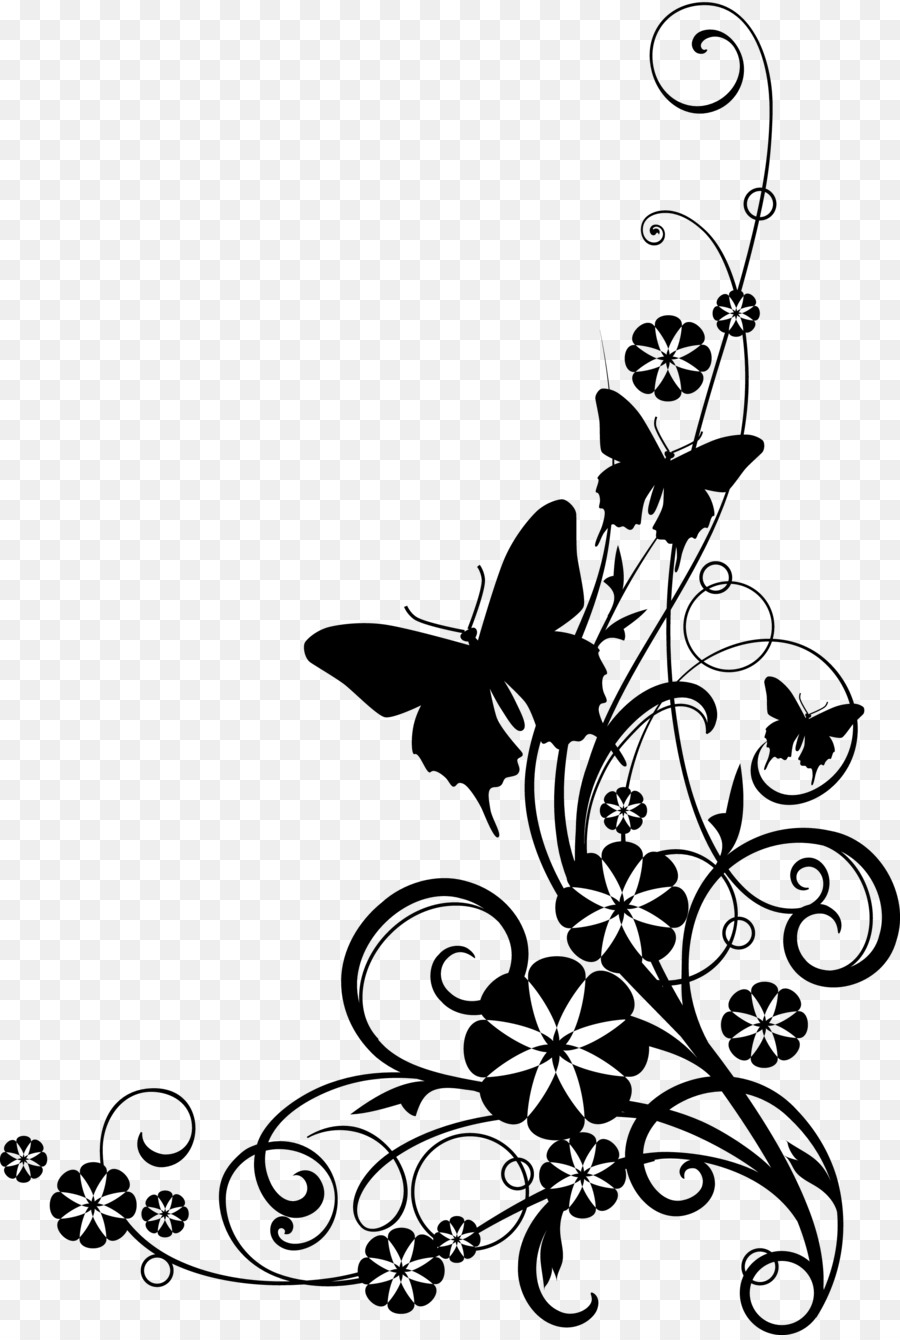 Flower Black and white Clip art - Butterfly Pictures Black And White png download - 2225*3300 - Free Transparent Flower png Download.